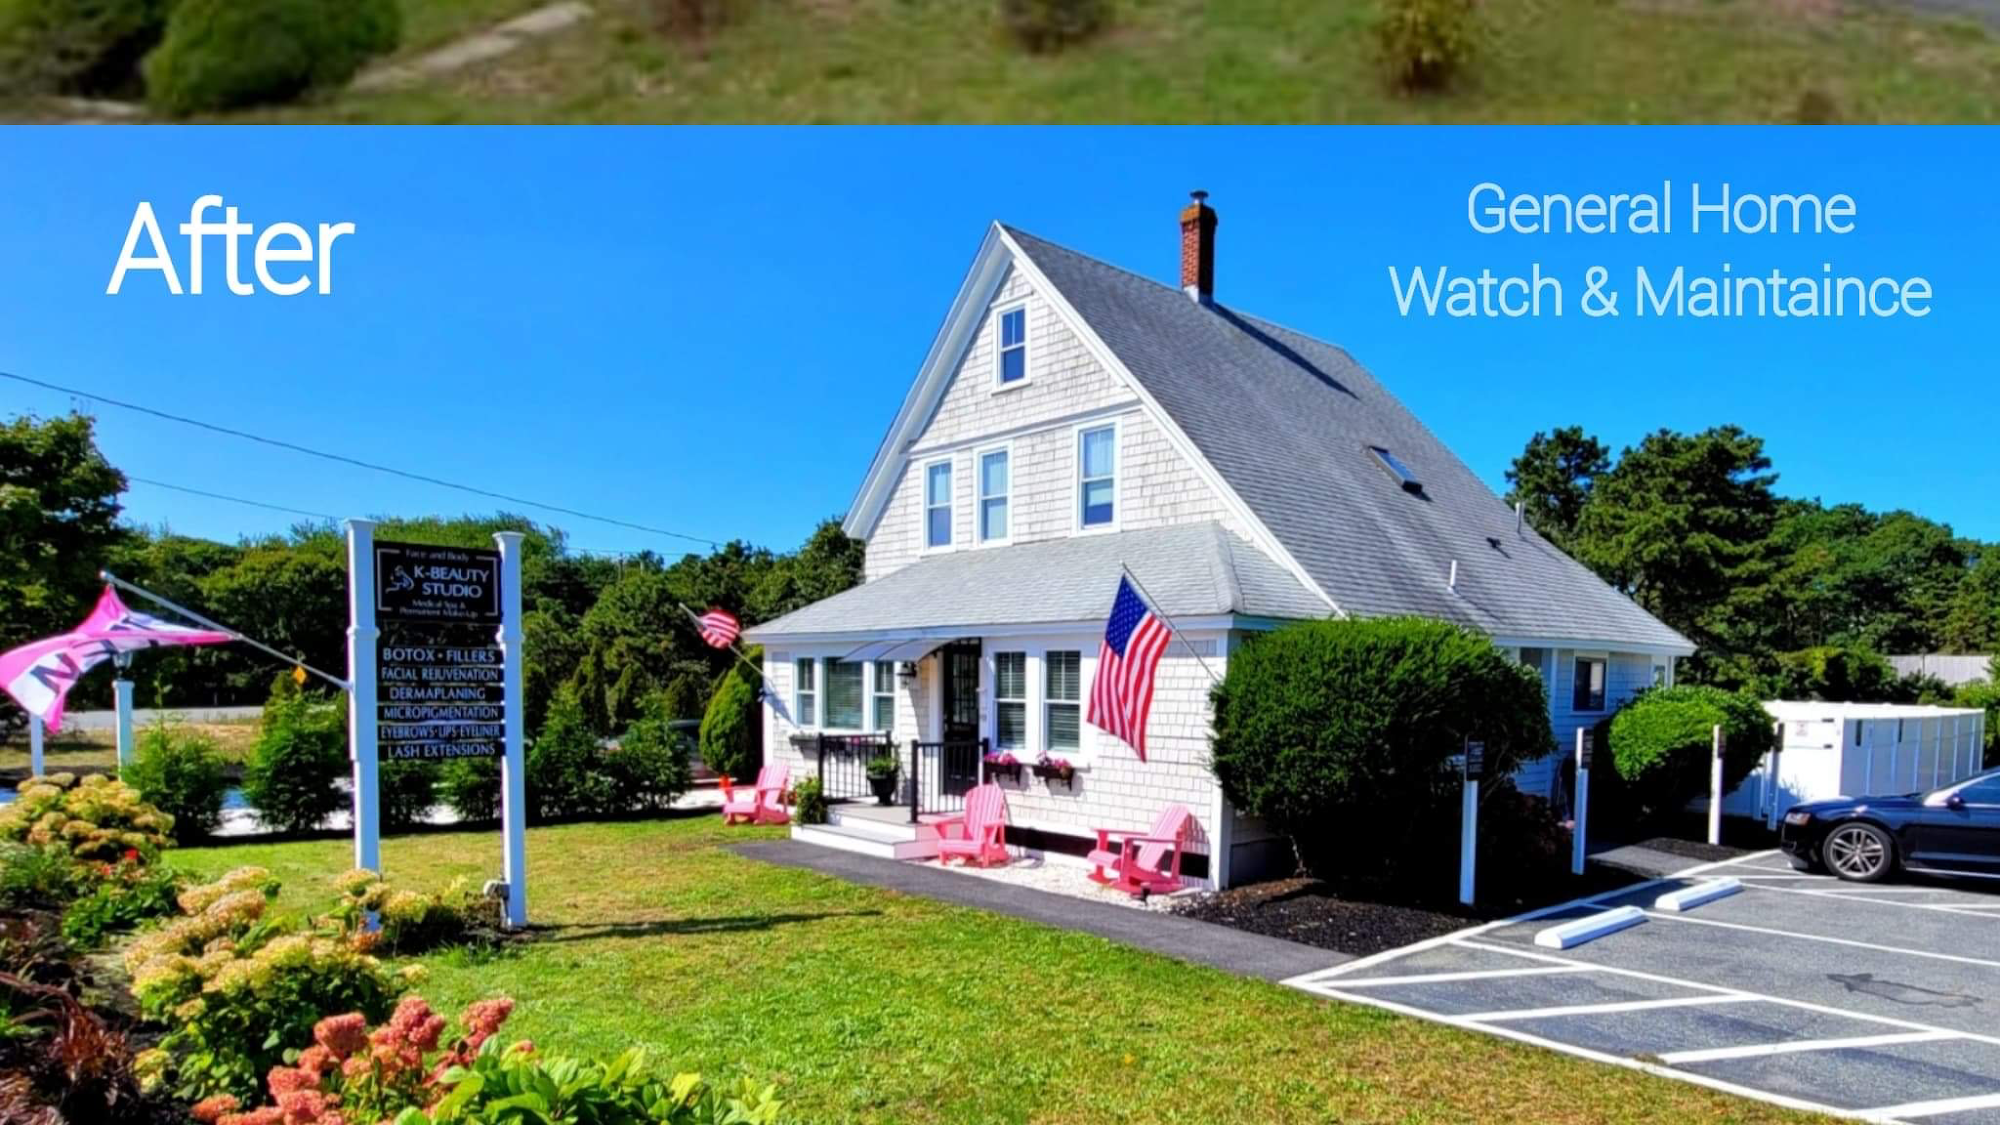 General Cape Realty and Renovations 2350 Main St, South Chatham Massachusetts 02659